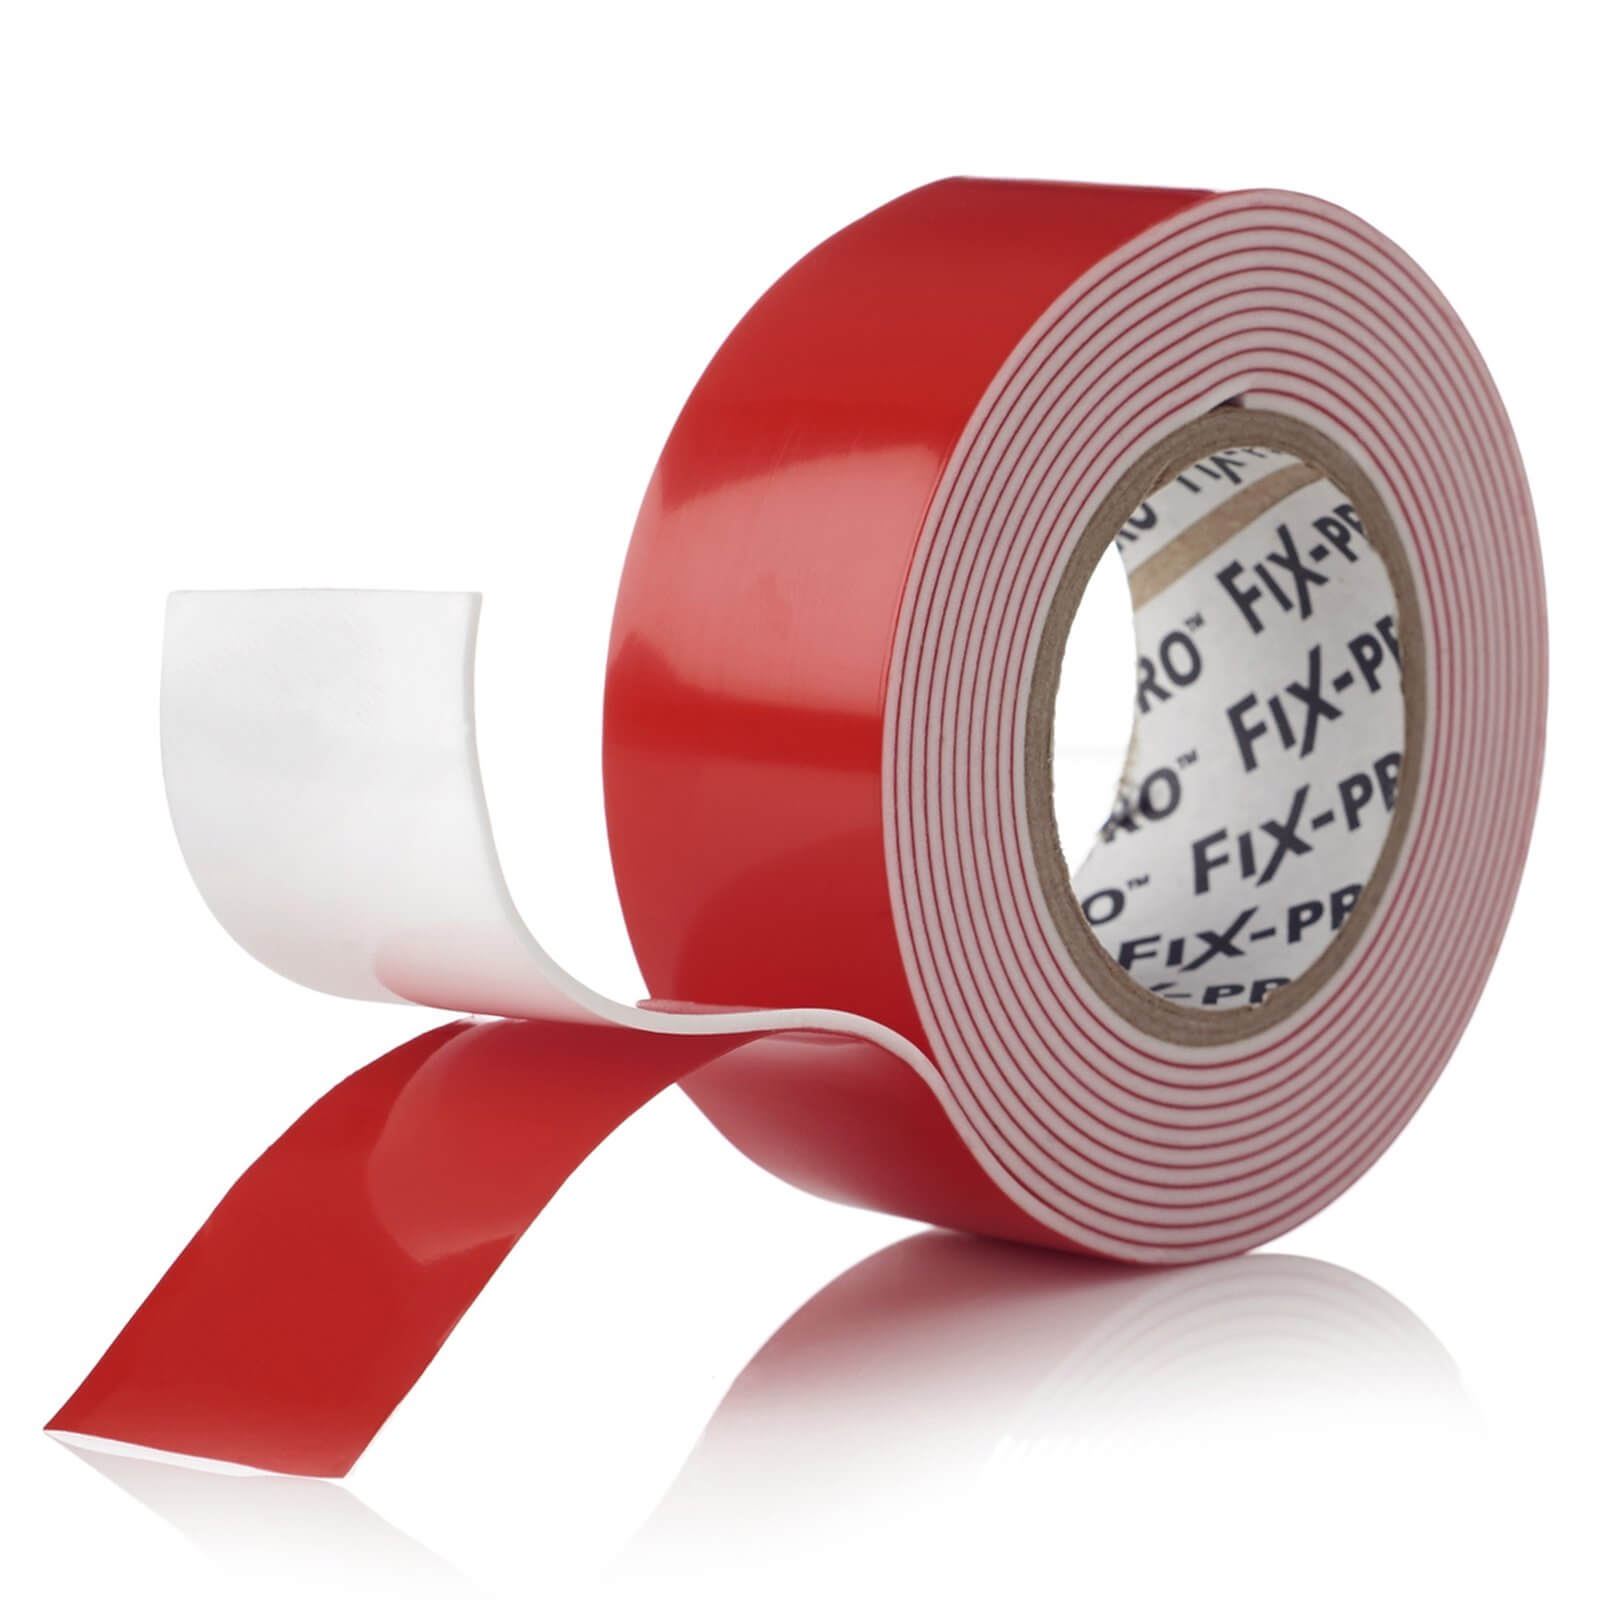 VELCRO Mounting Tape 2m x 25mm White Indoor